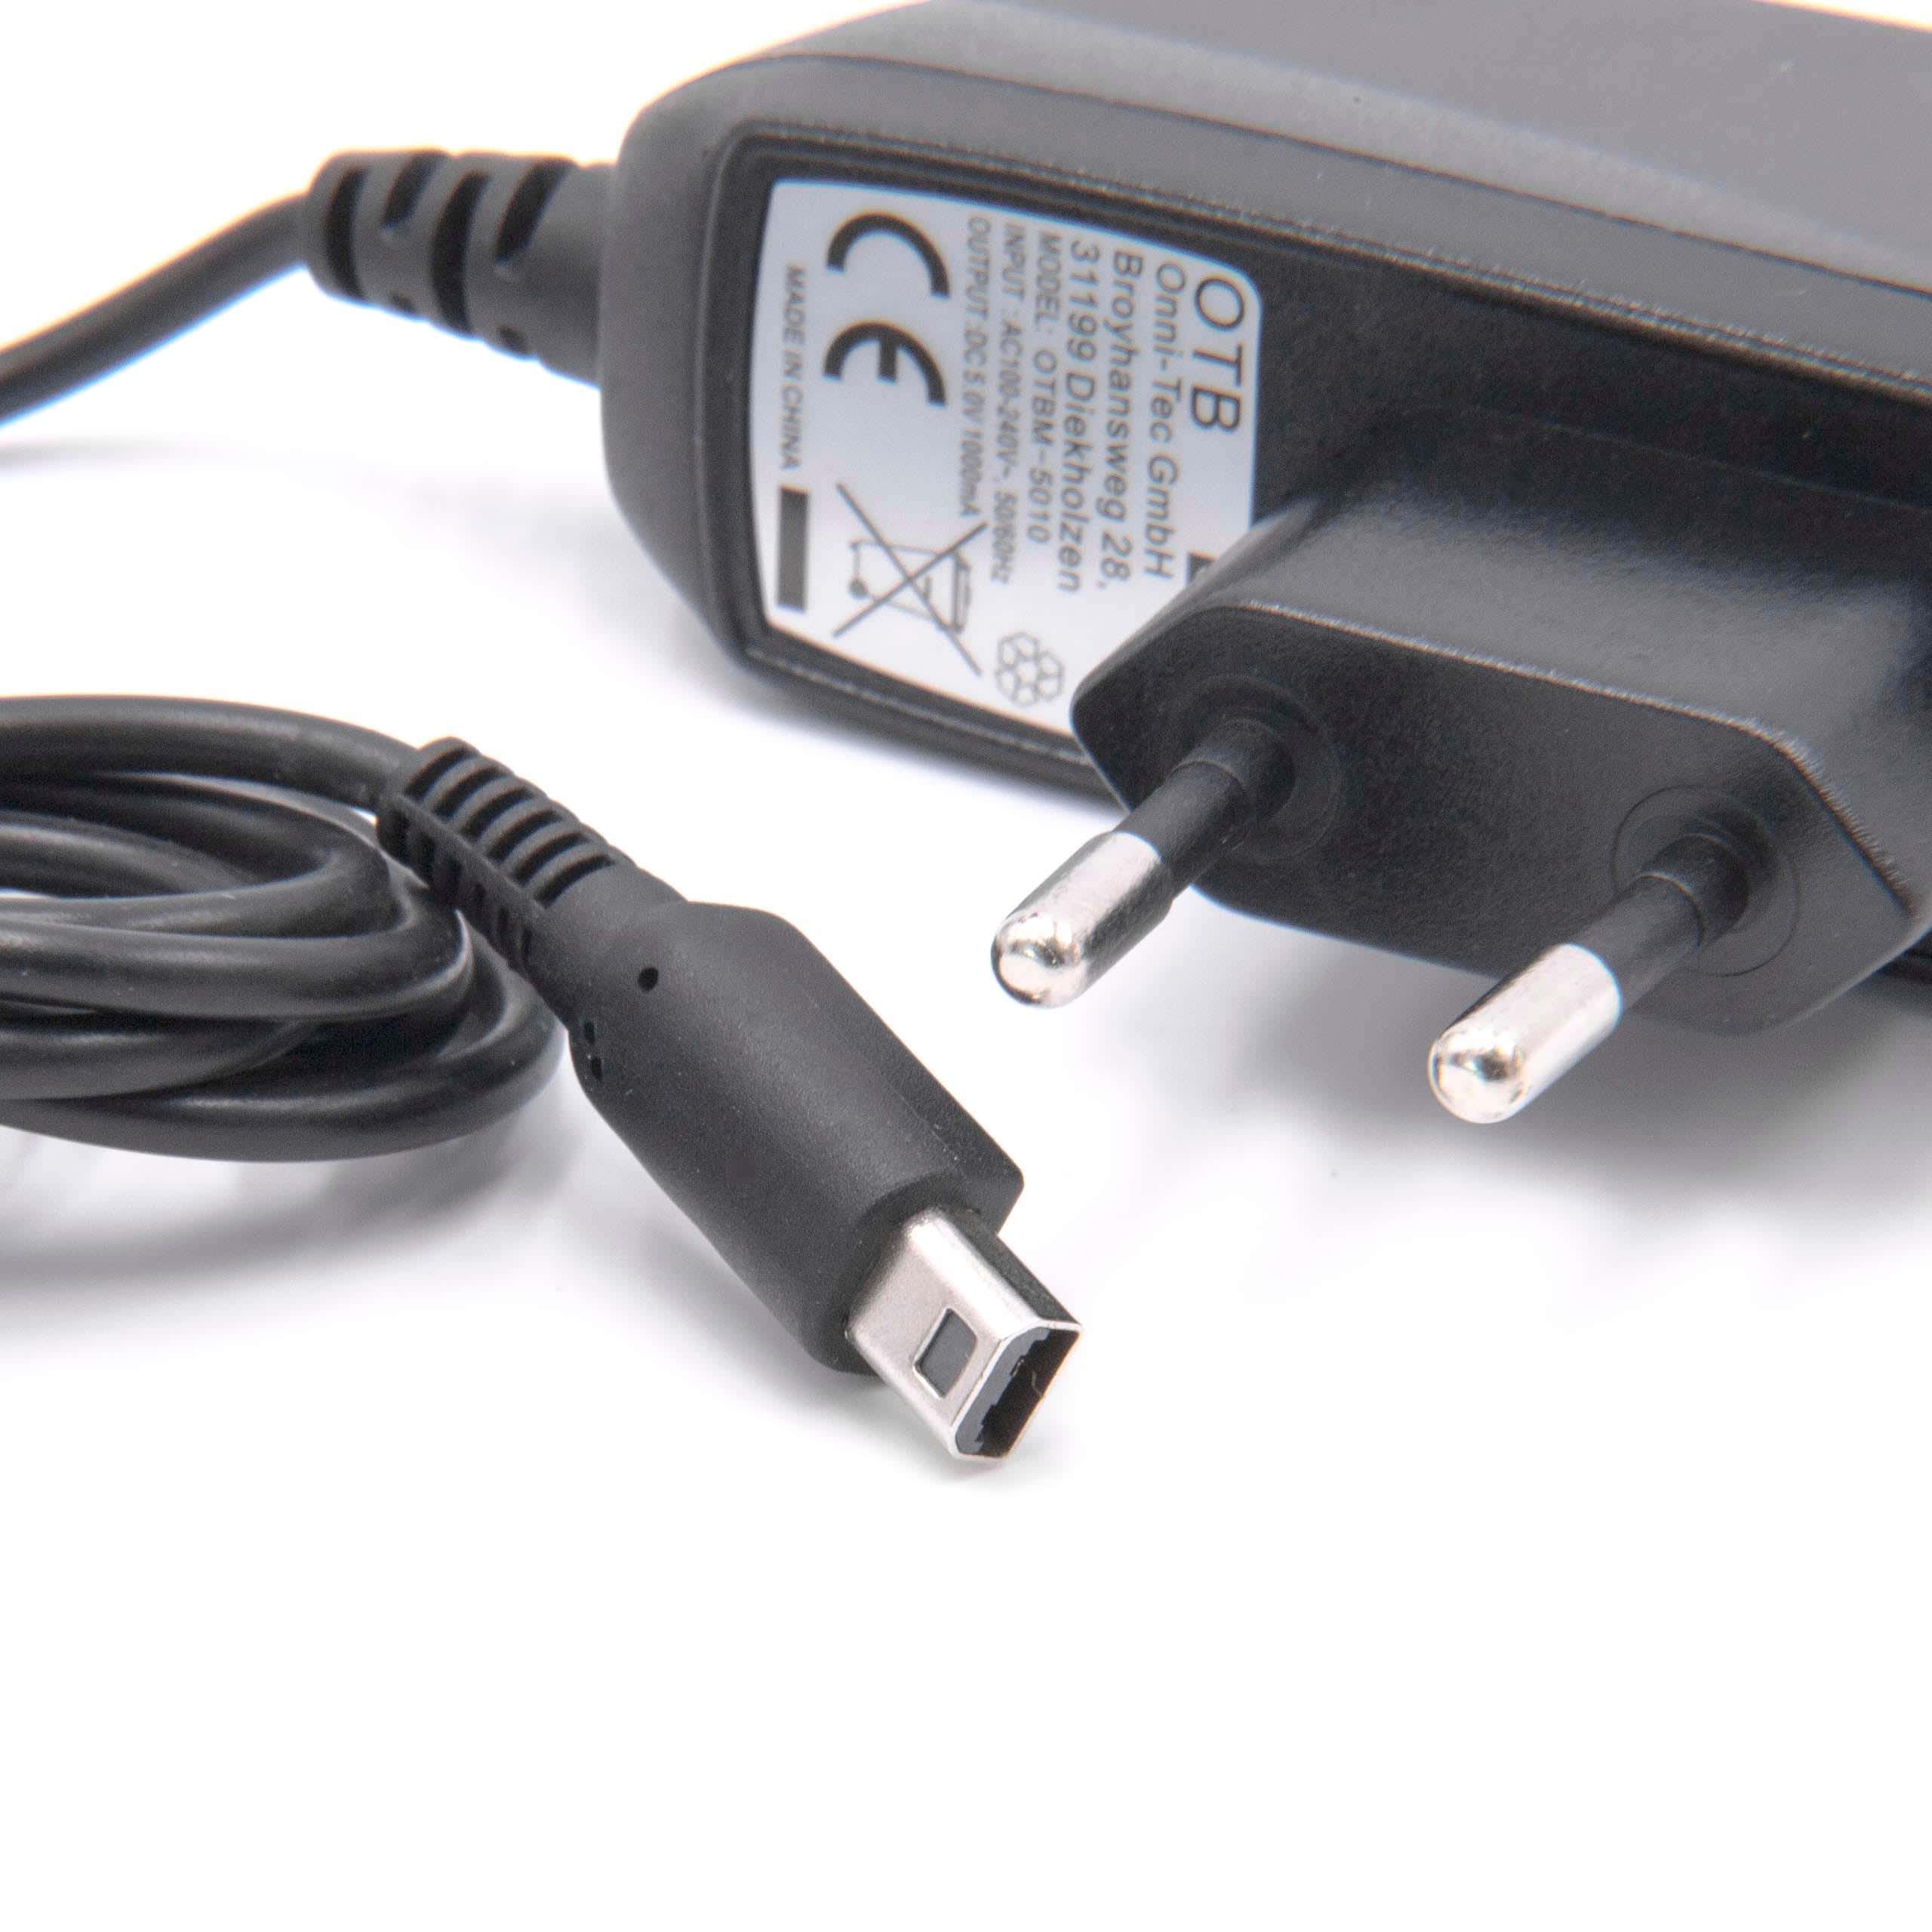 Charger suitable for Nintendo 3DS Game Console